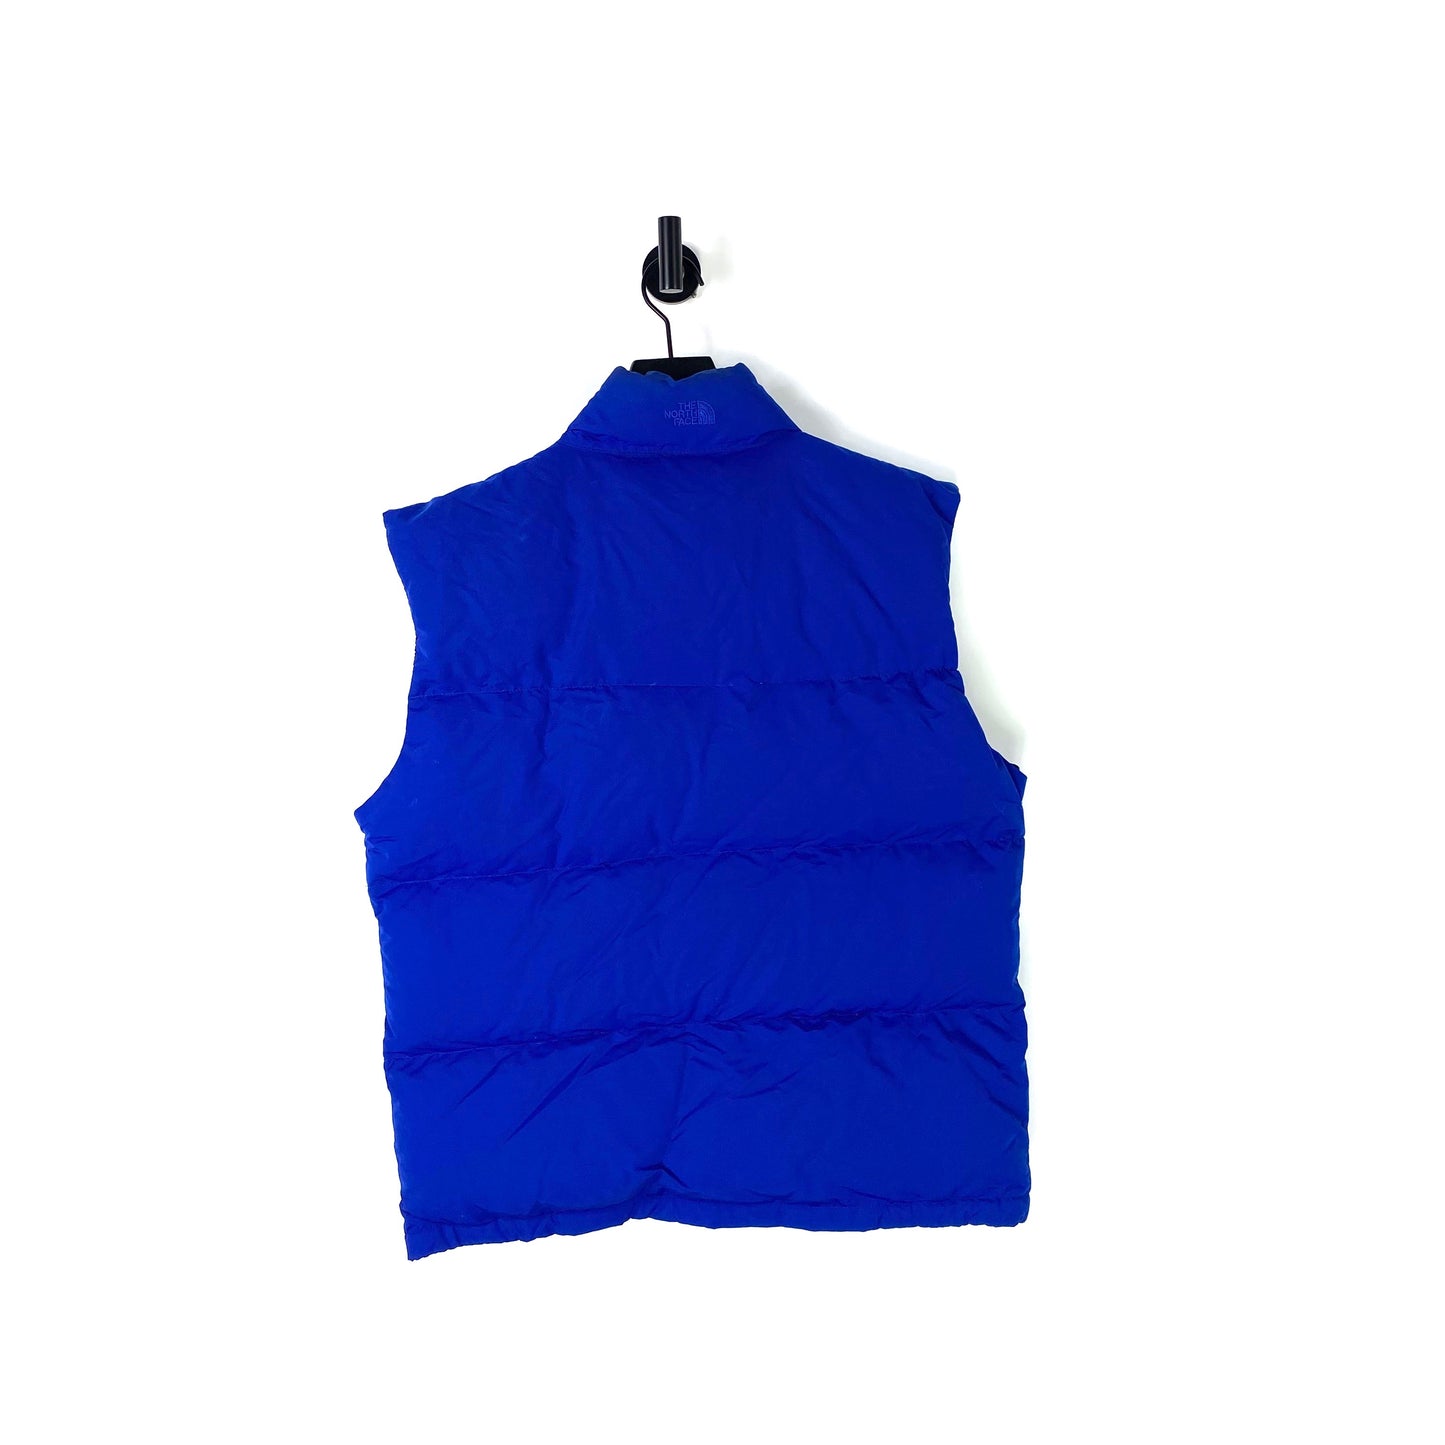 90s North Face Puffer Vest - M